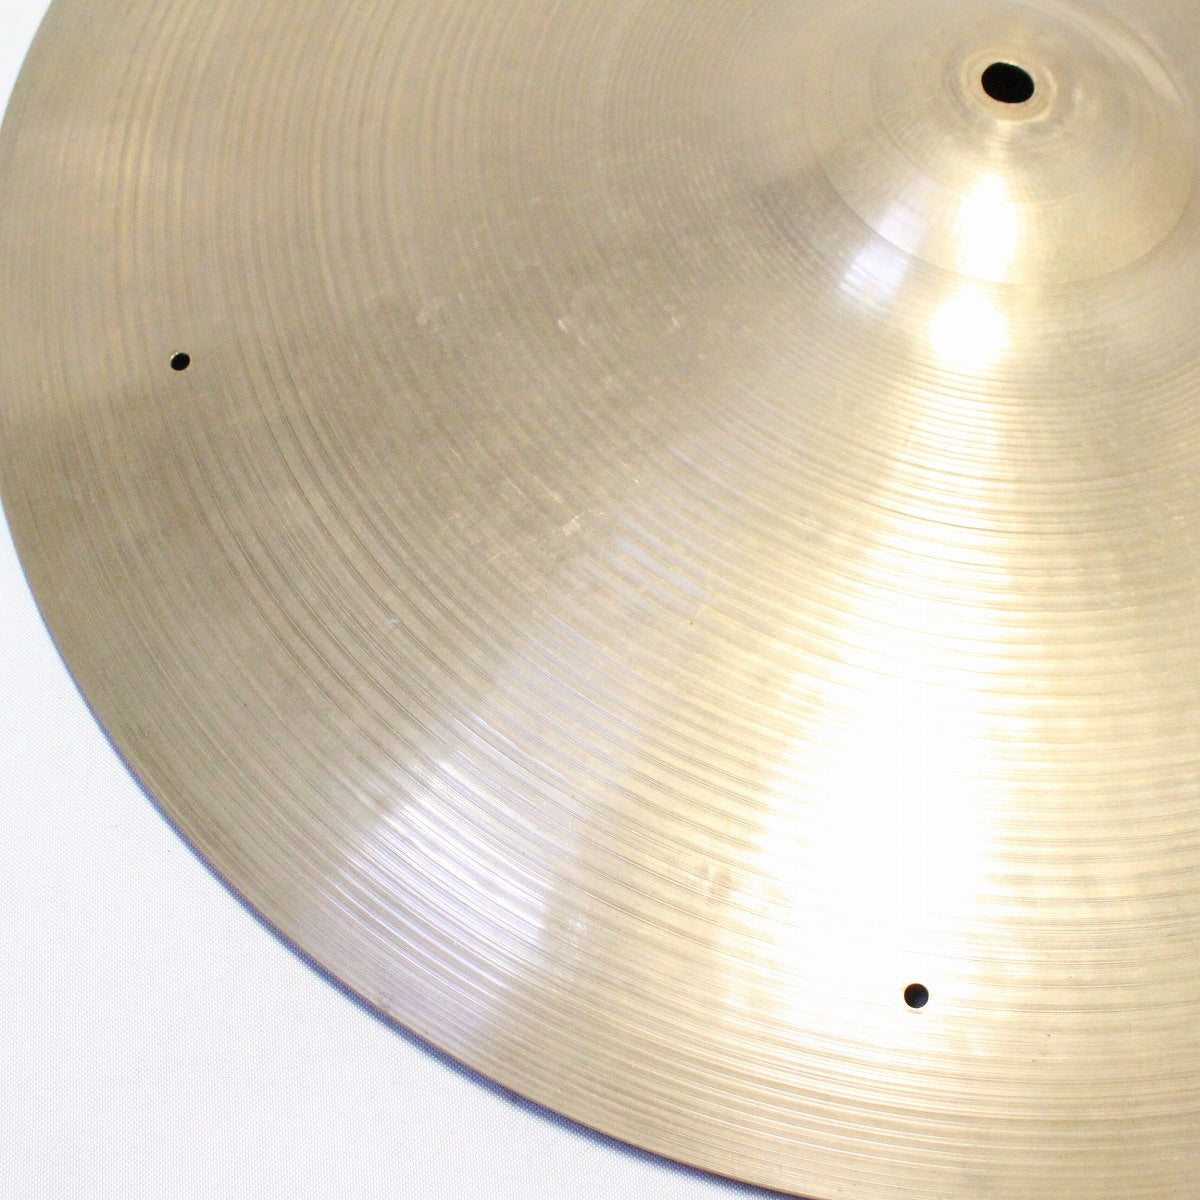 USED ZILDJIAN / Late50s A Small Stamp 20" 2244g Old A Ride Cymbal [08]